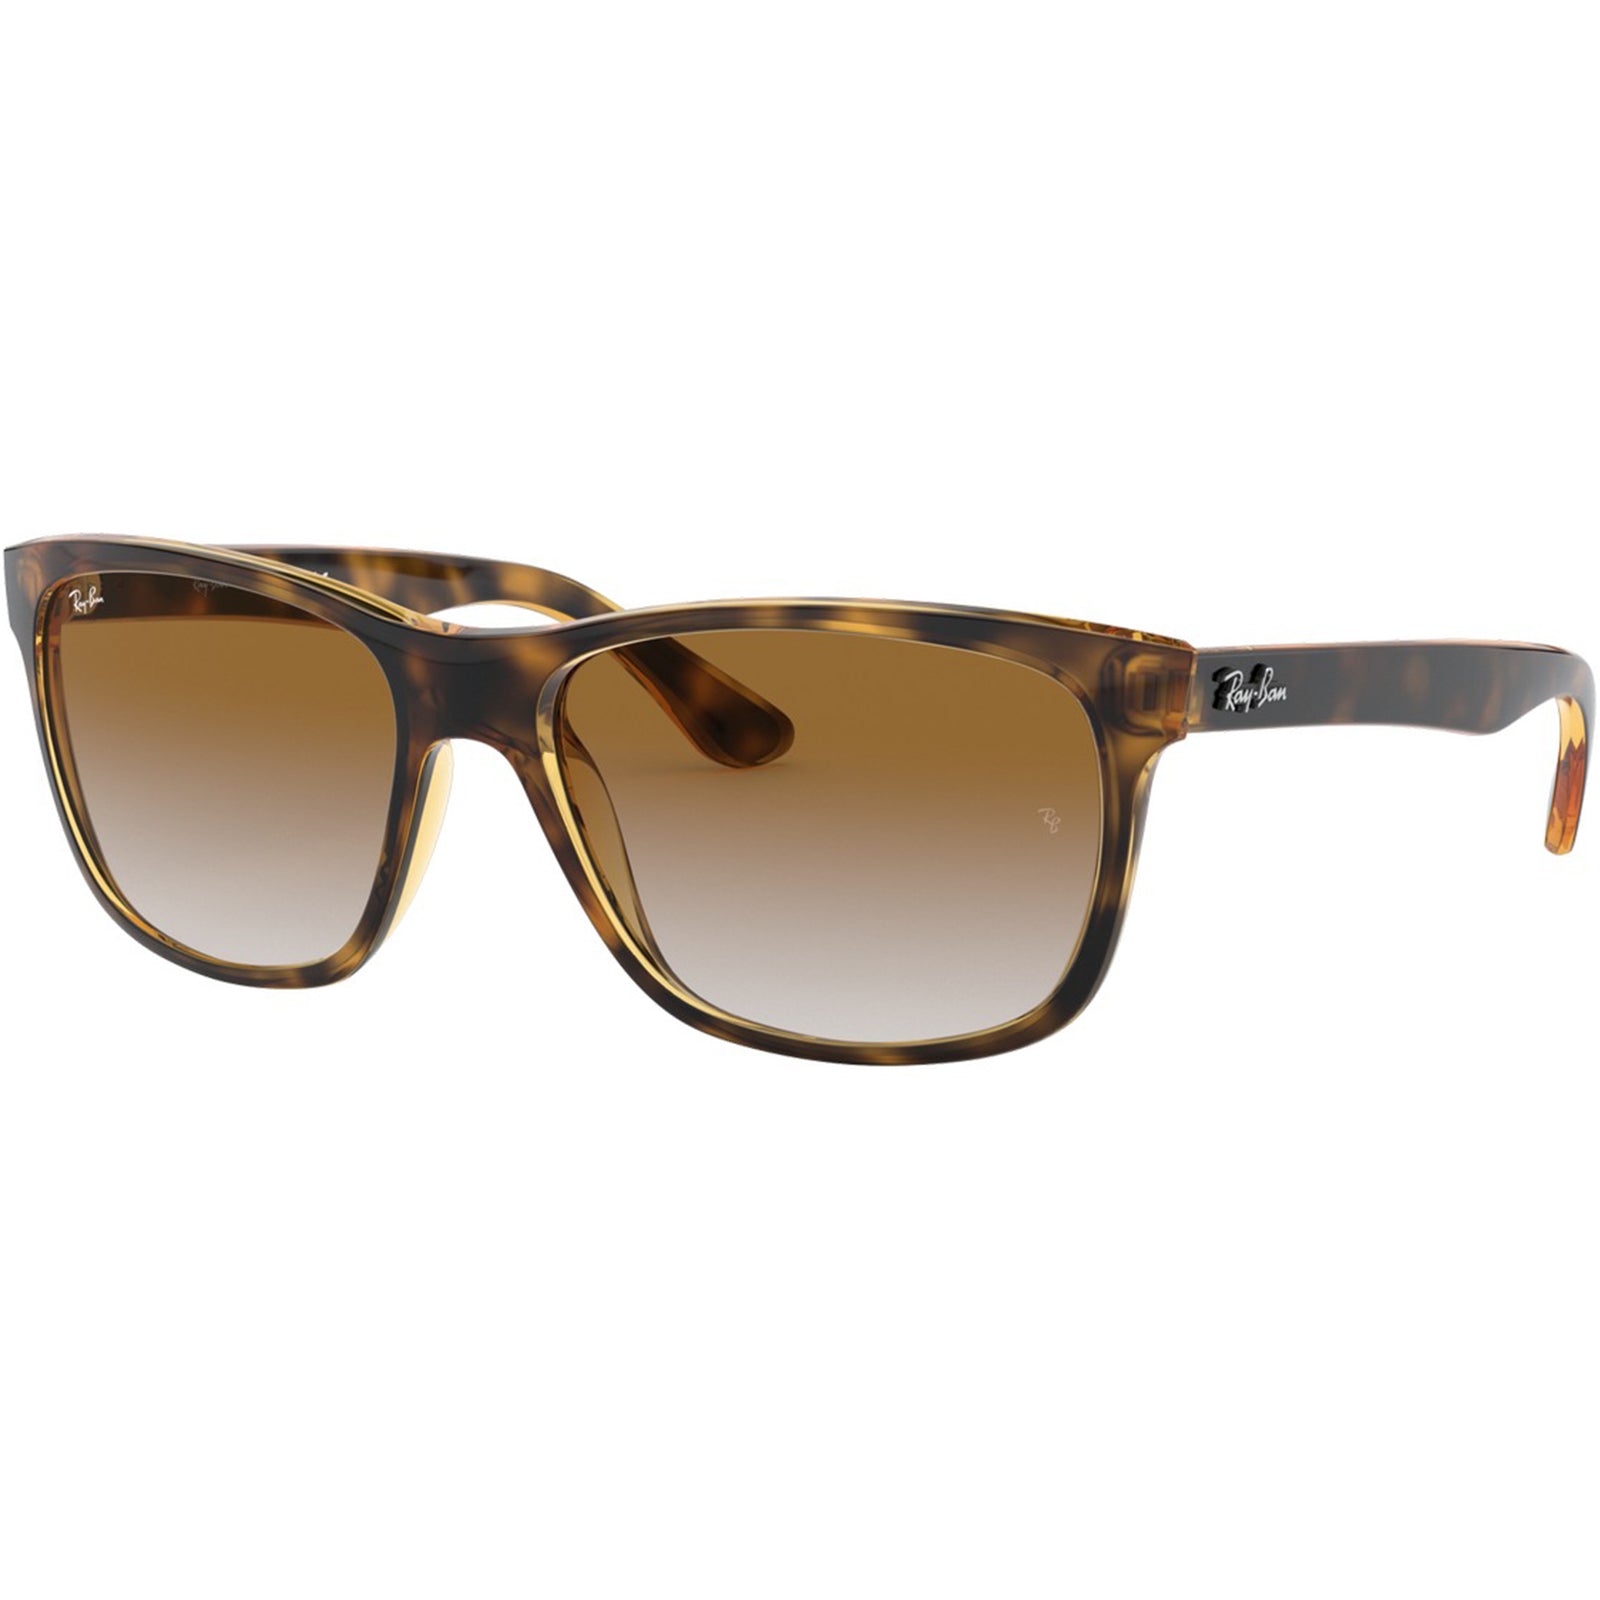 Ray-Ban RB4181 Adult Lifestyle Sunglasses-RB4181